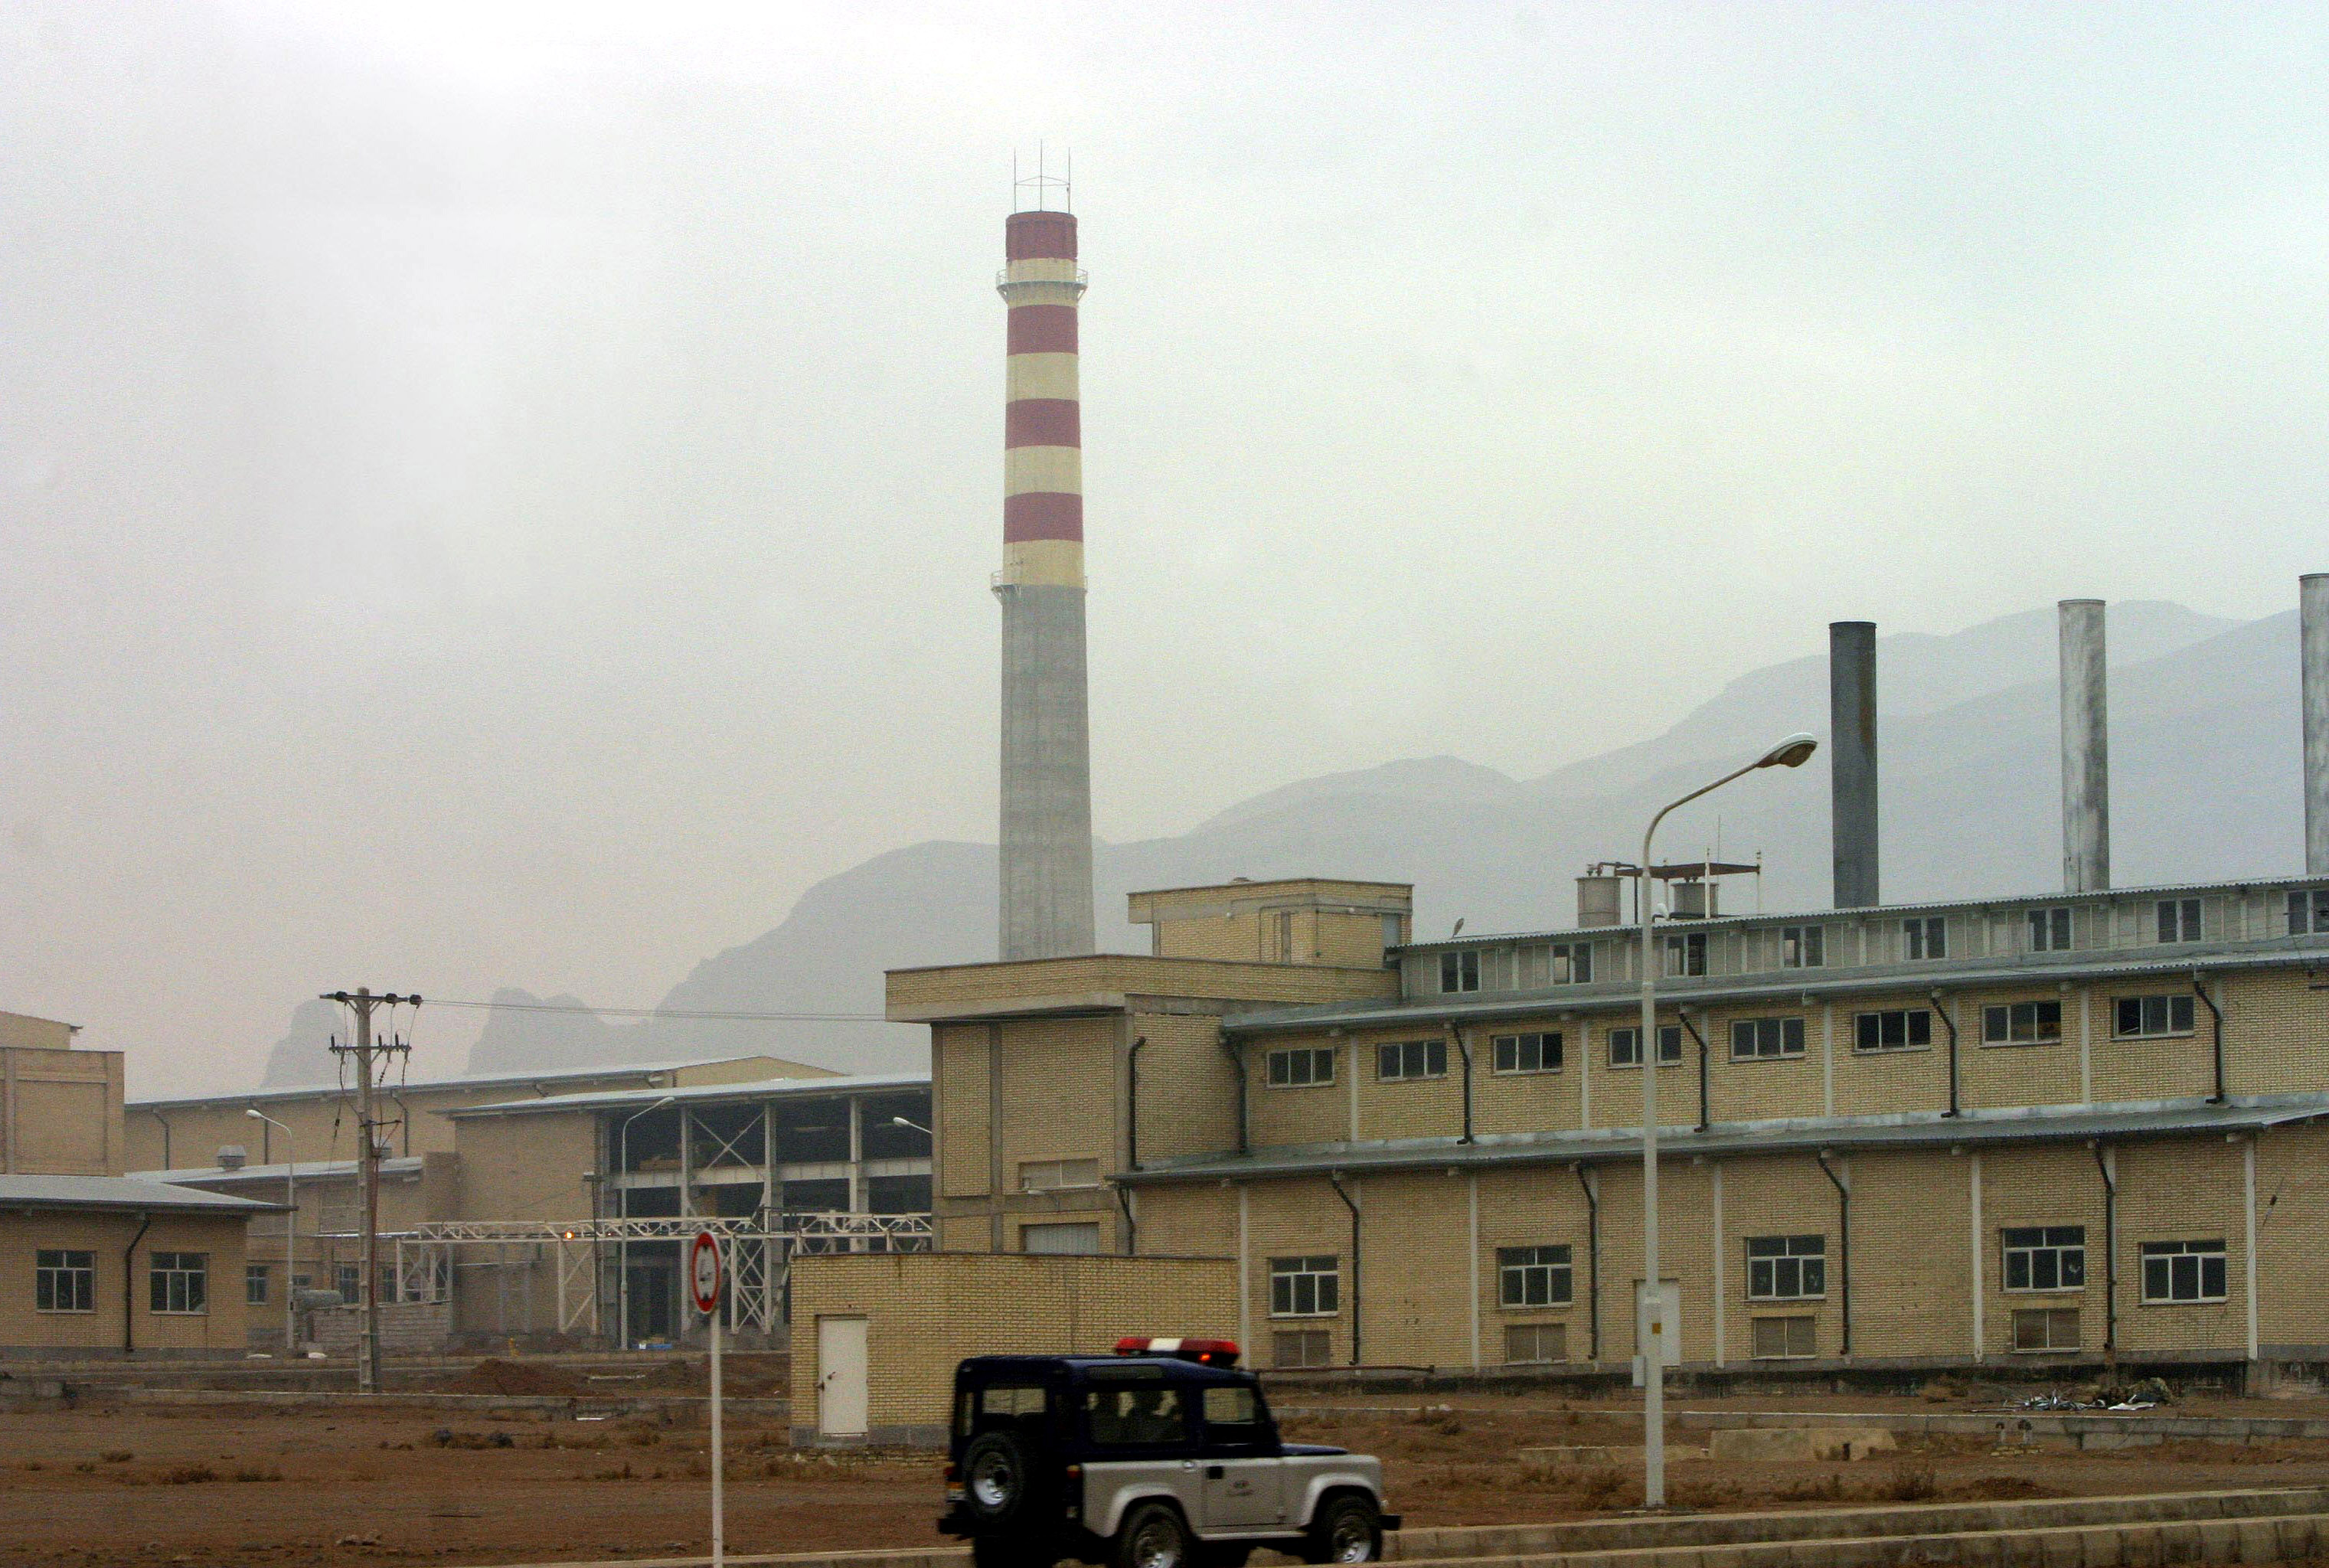 A security car passes in front of the Natanz nuclear facility, 300 km south of Tehrah, Iran on Nov. 20, 2004. (Stringer/Reuters)